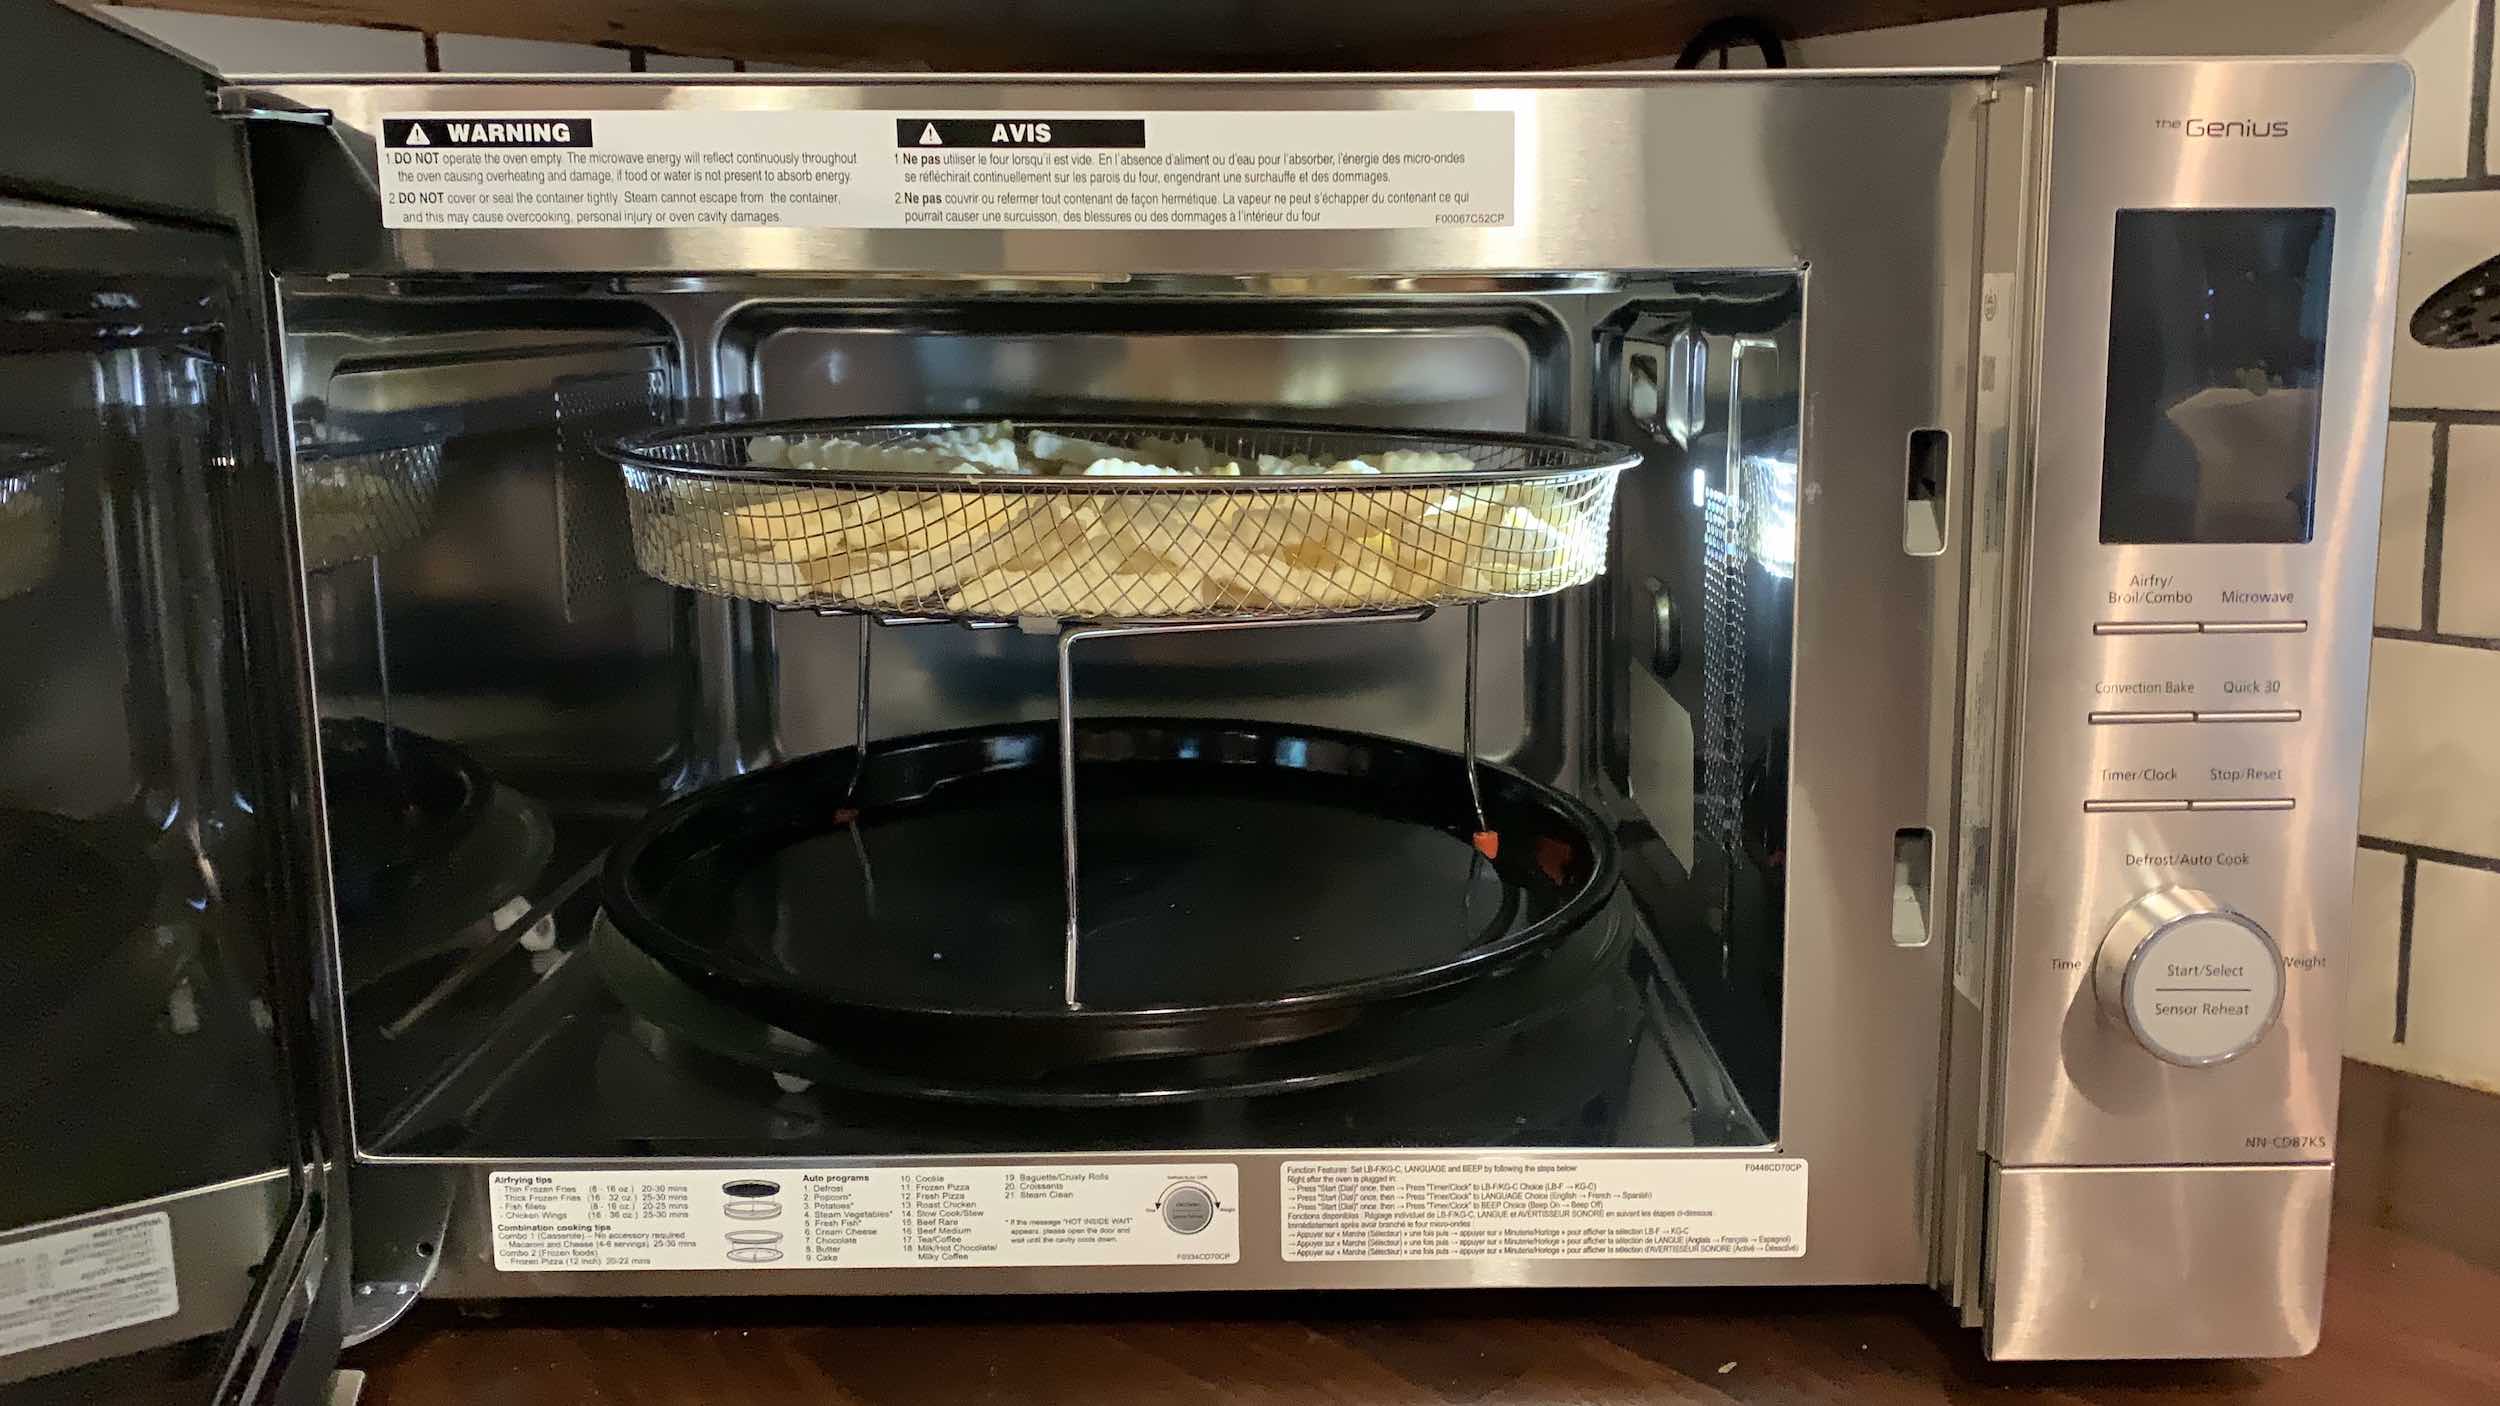 Panasonic 4-in-1 with Air Fry 